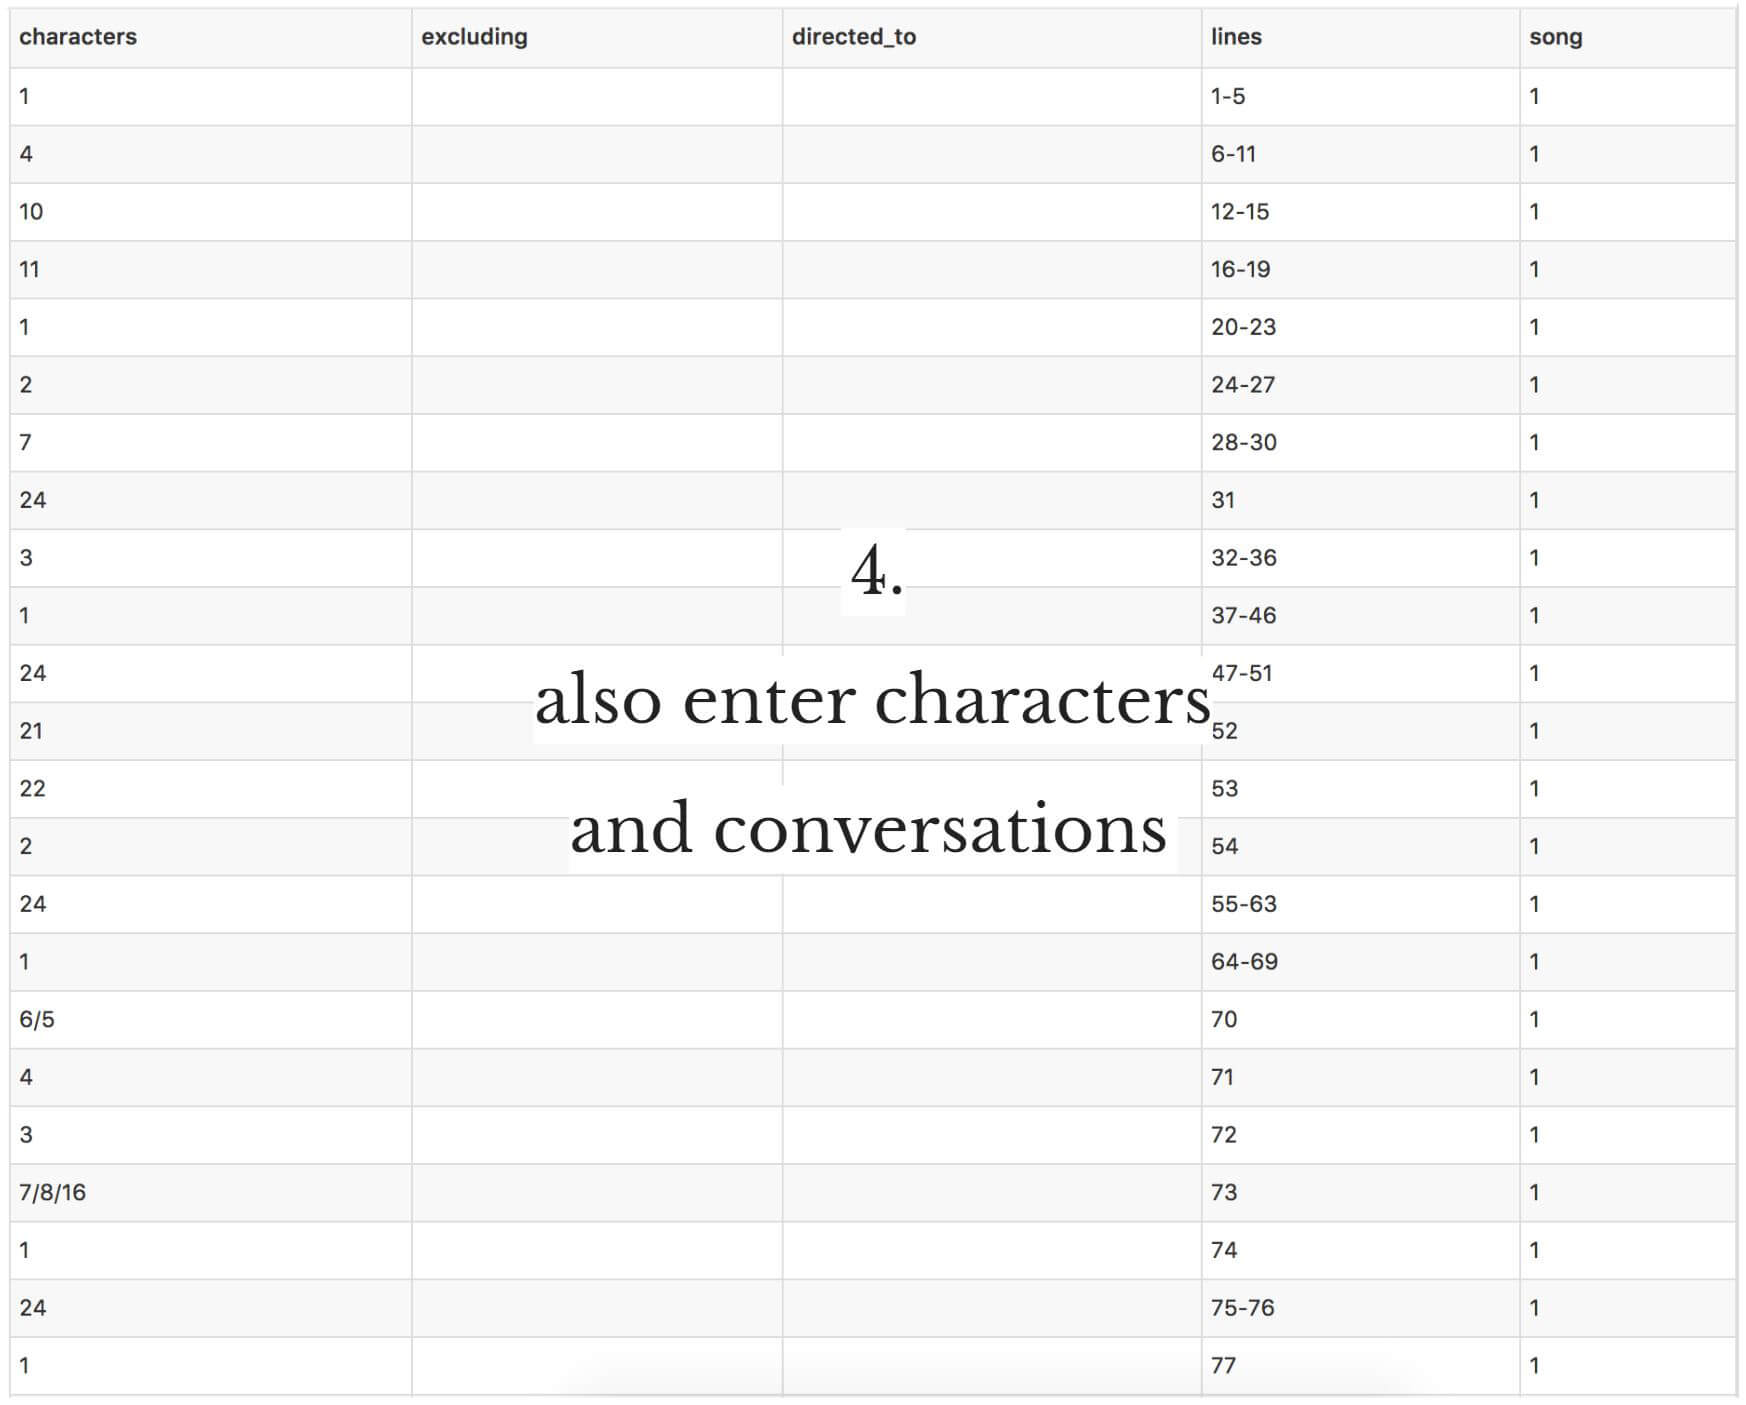 4. also enter characters and conversations